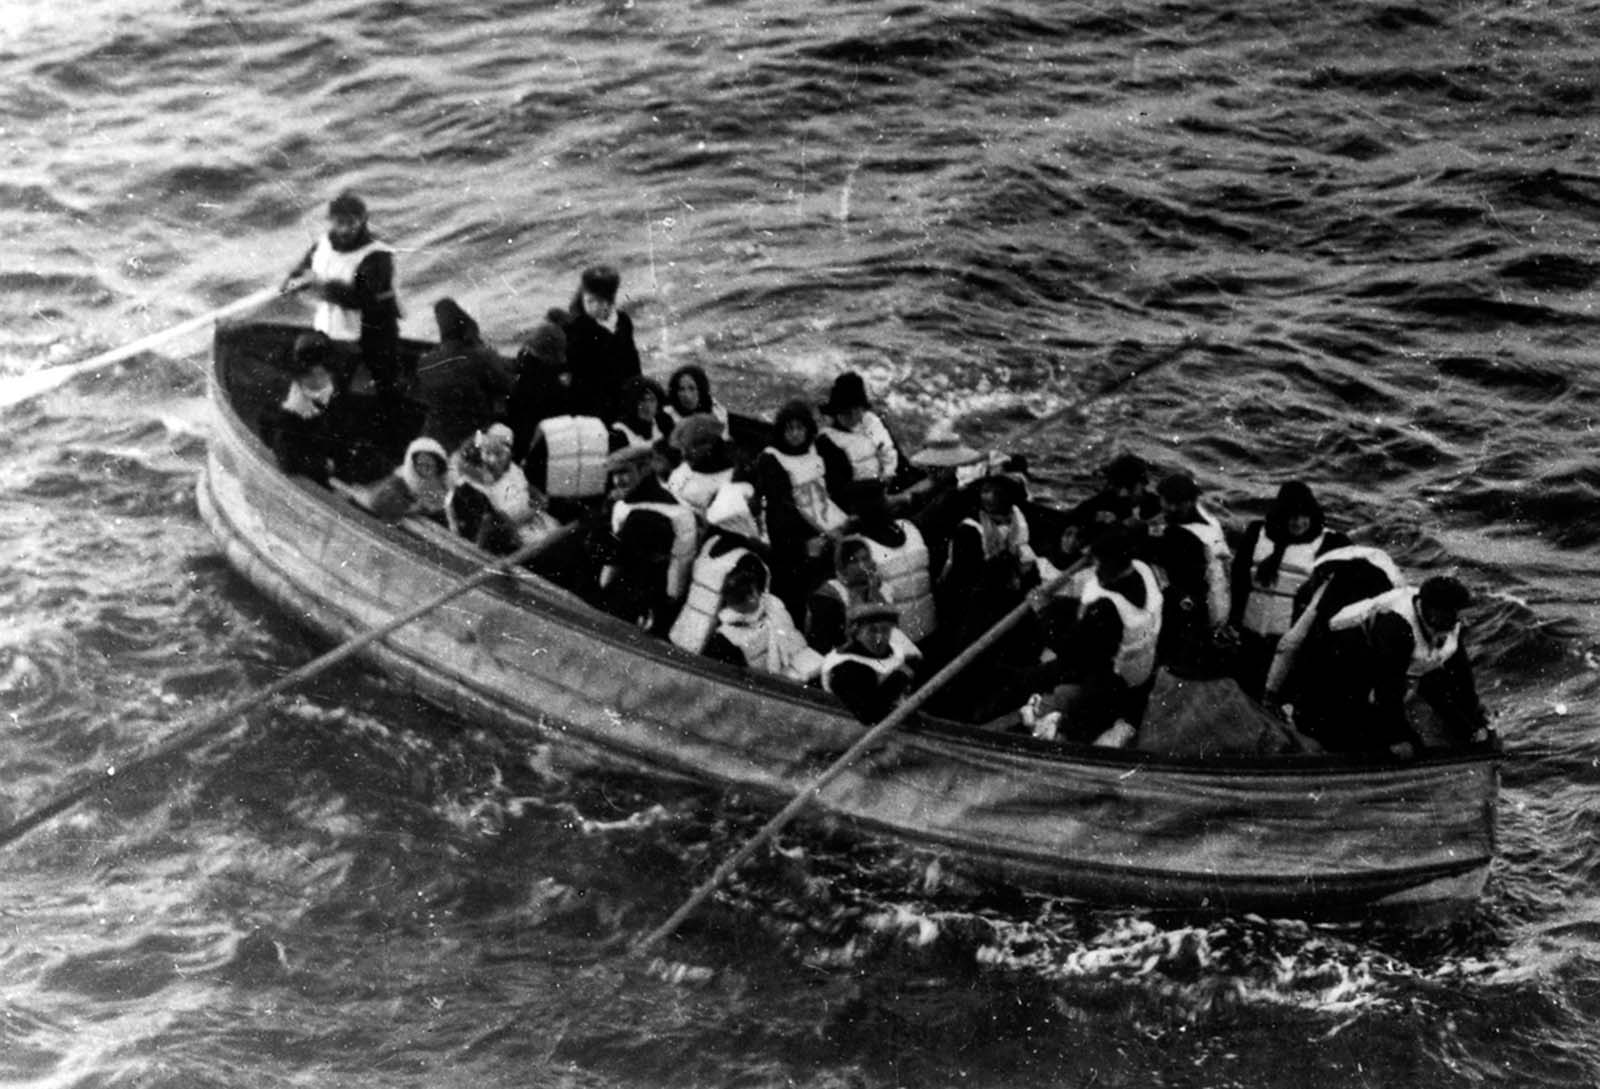 Titanic survivors in a lifeboat.